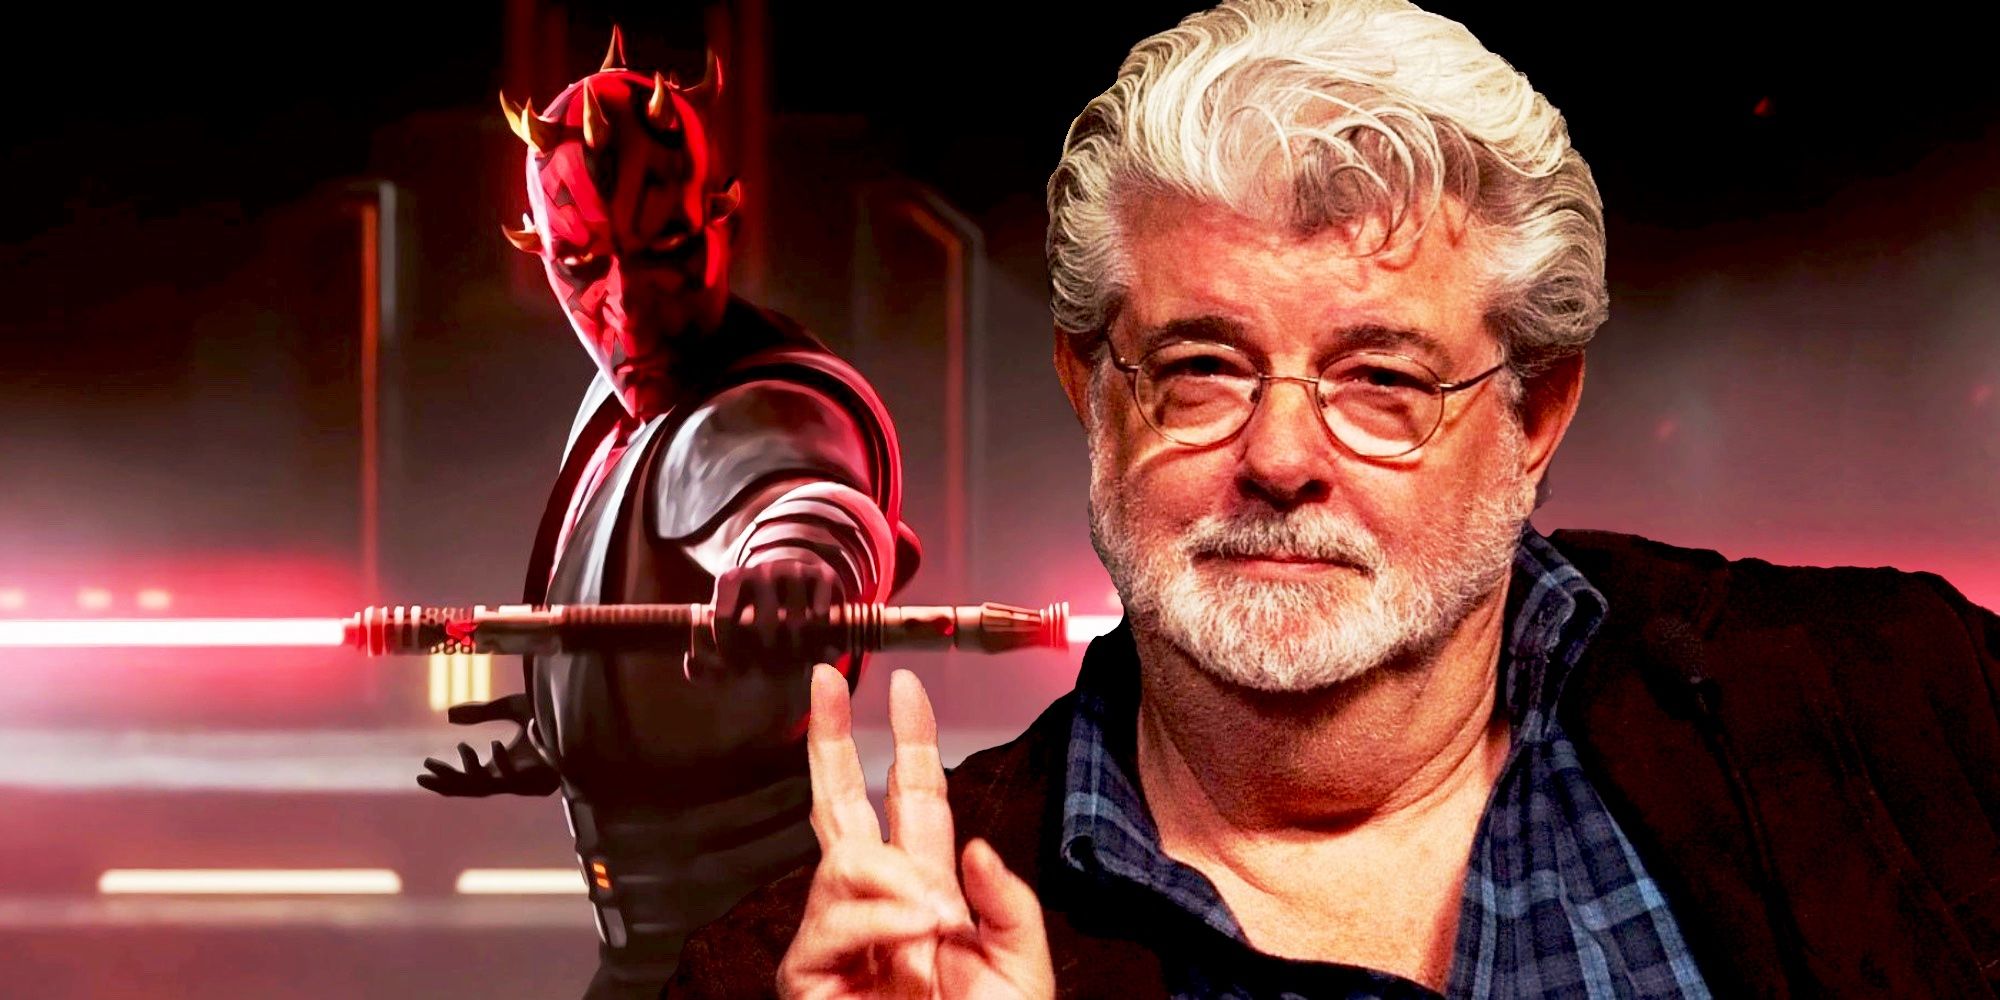 Darth aul and George Lucas